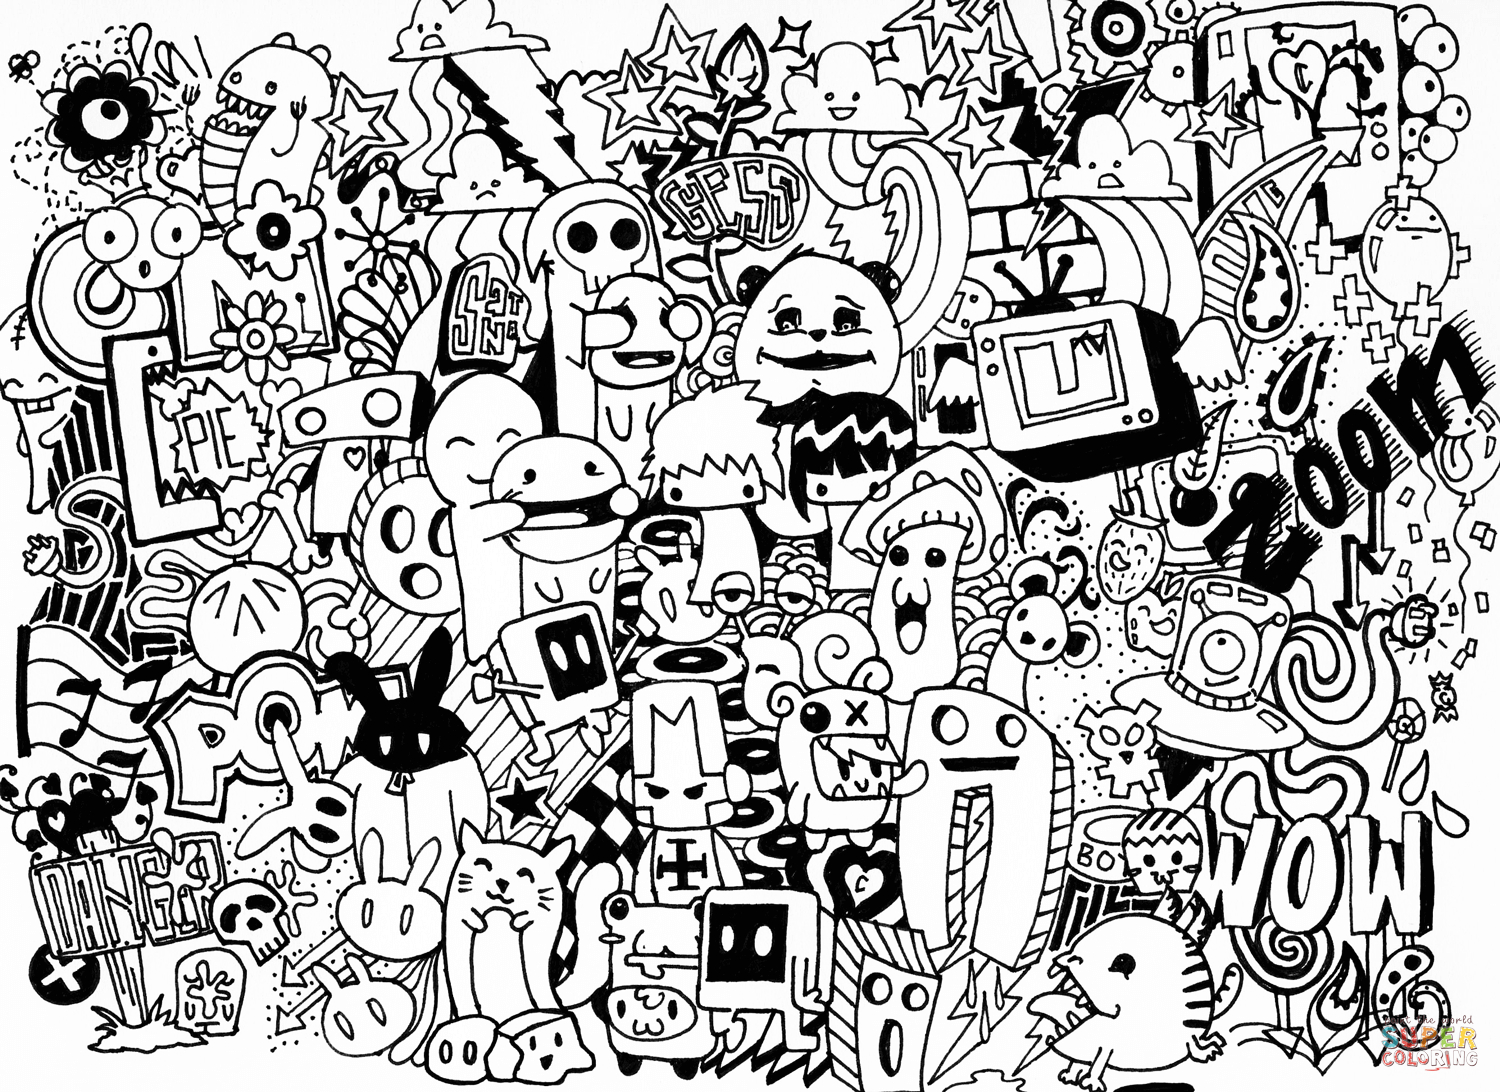 Doodle Collab Coloring Page | Free Printable Coloring Pages - Free Printable Doodle Patterns